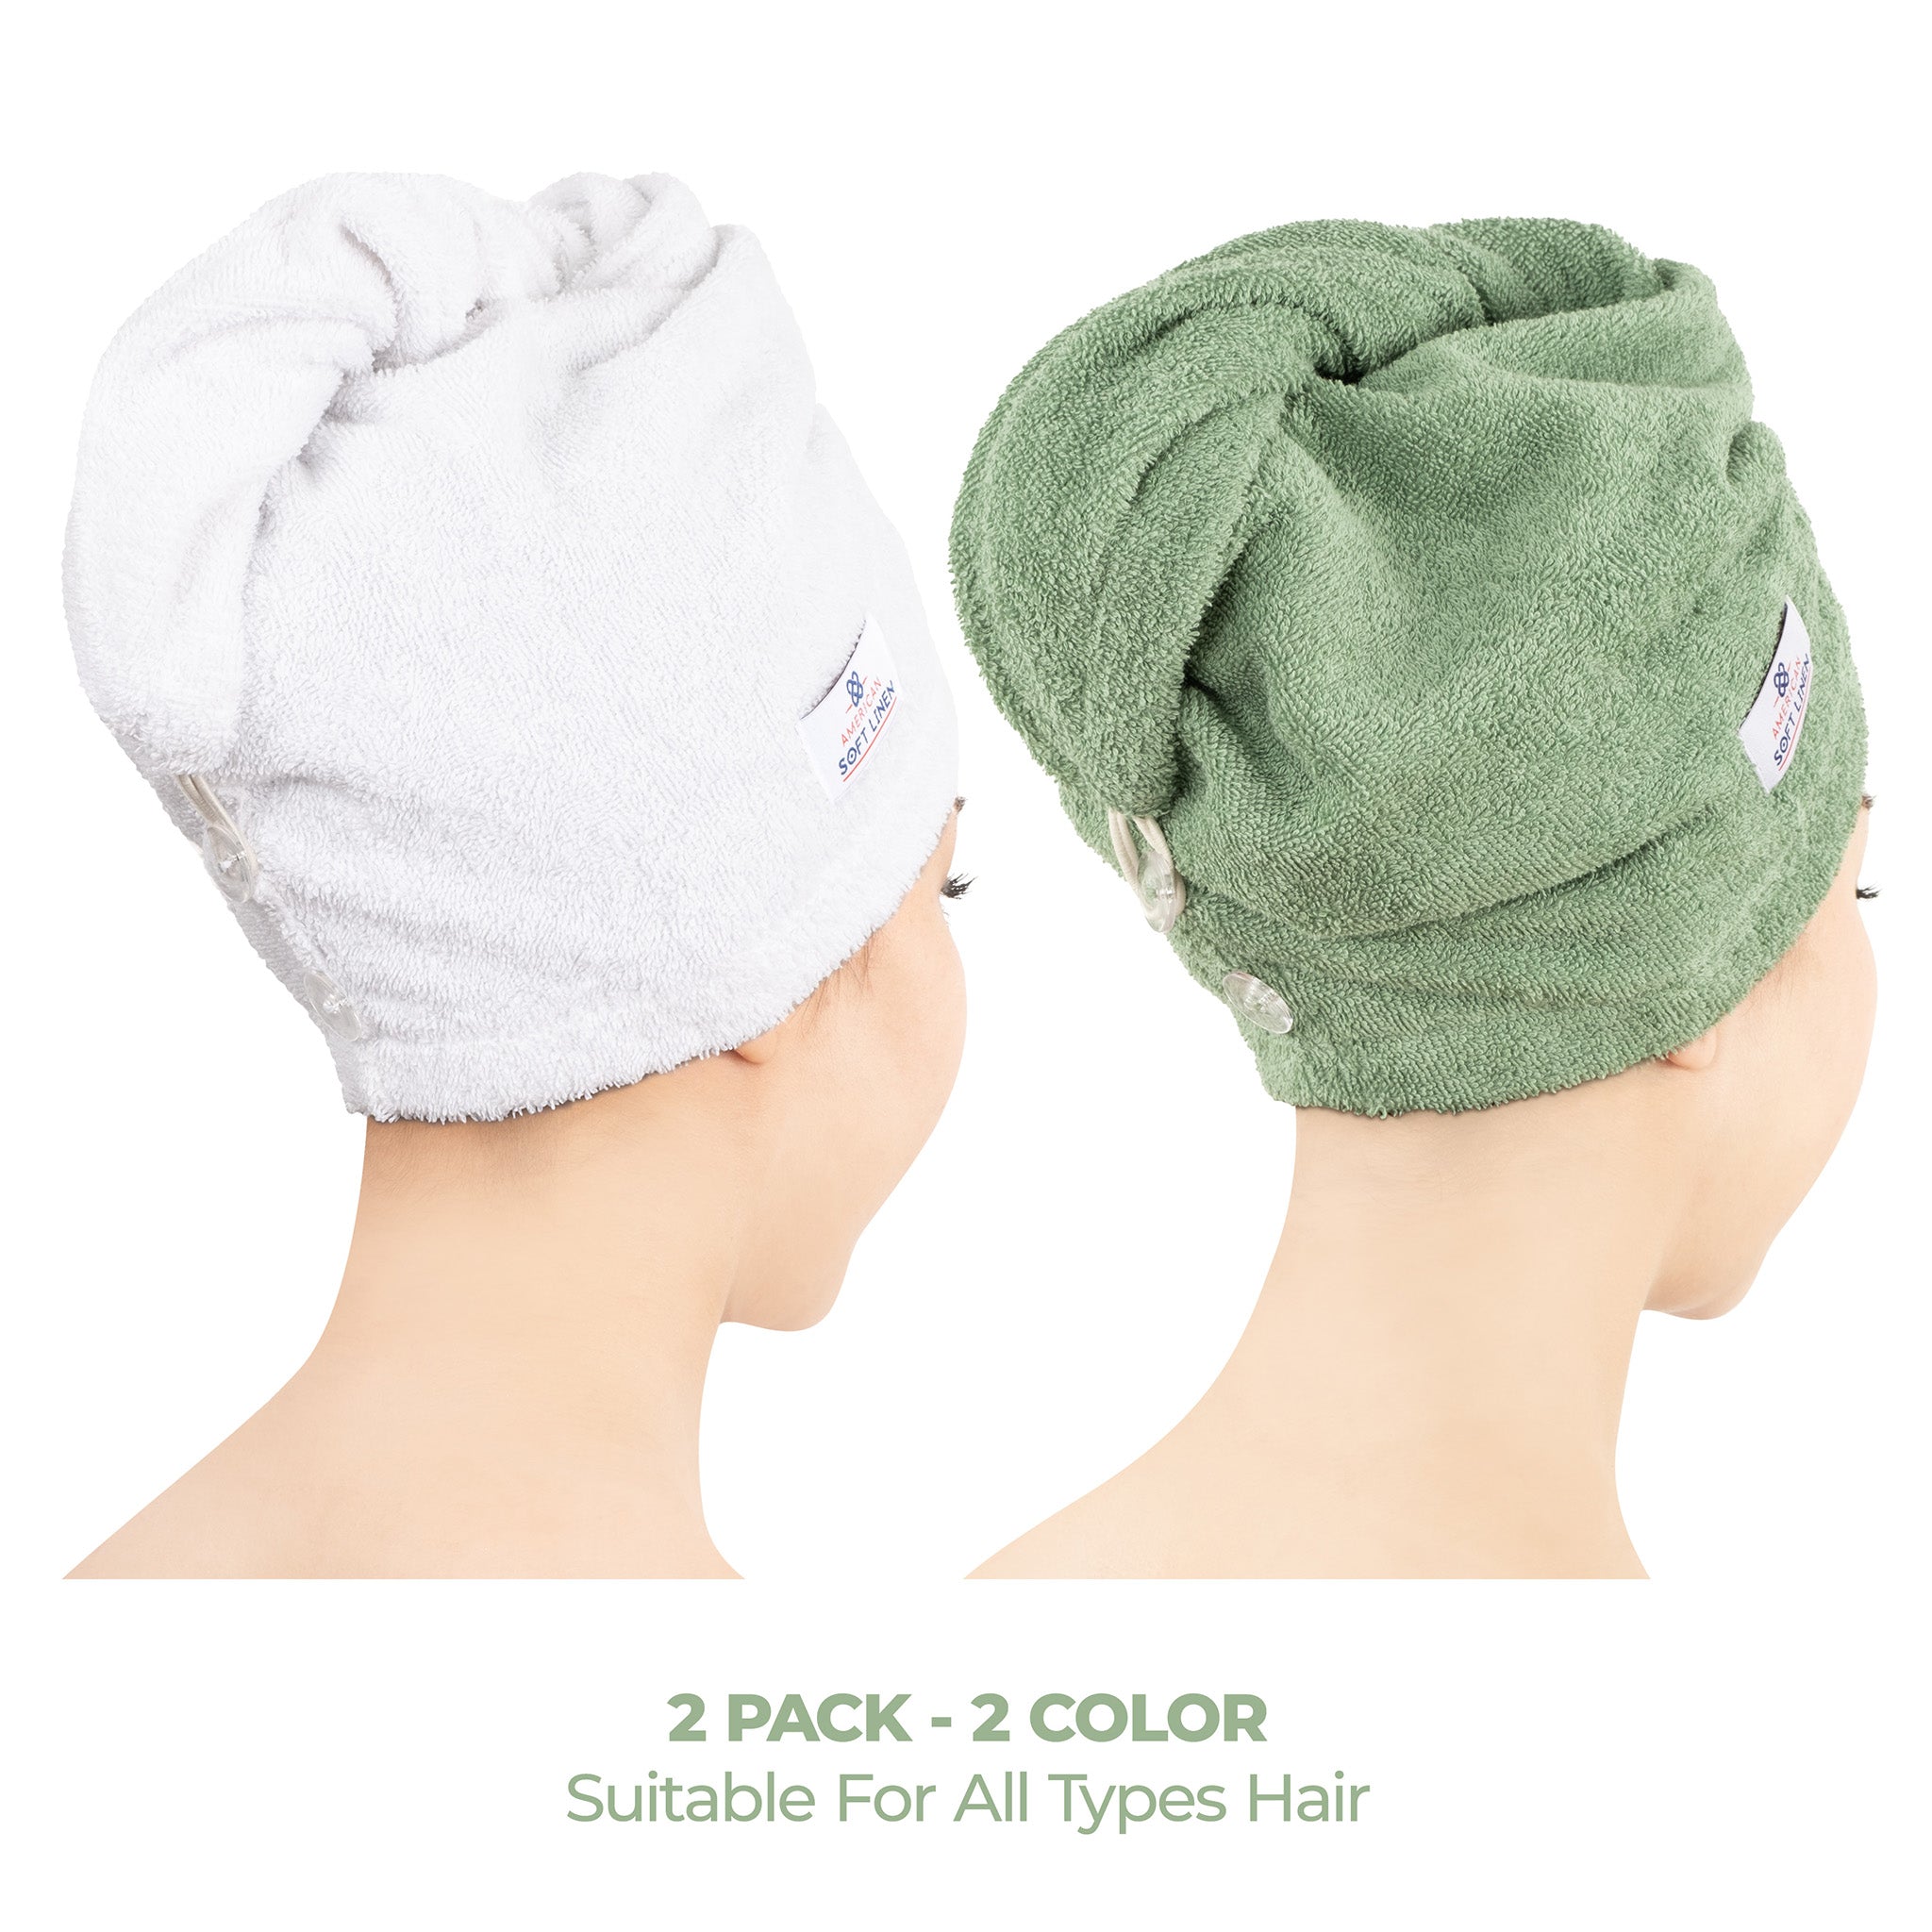 American Soft Linen 100% Cotton Hair Drying Towels for Women 2 pack 75 set case pack white-sage green-2